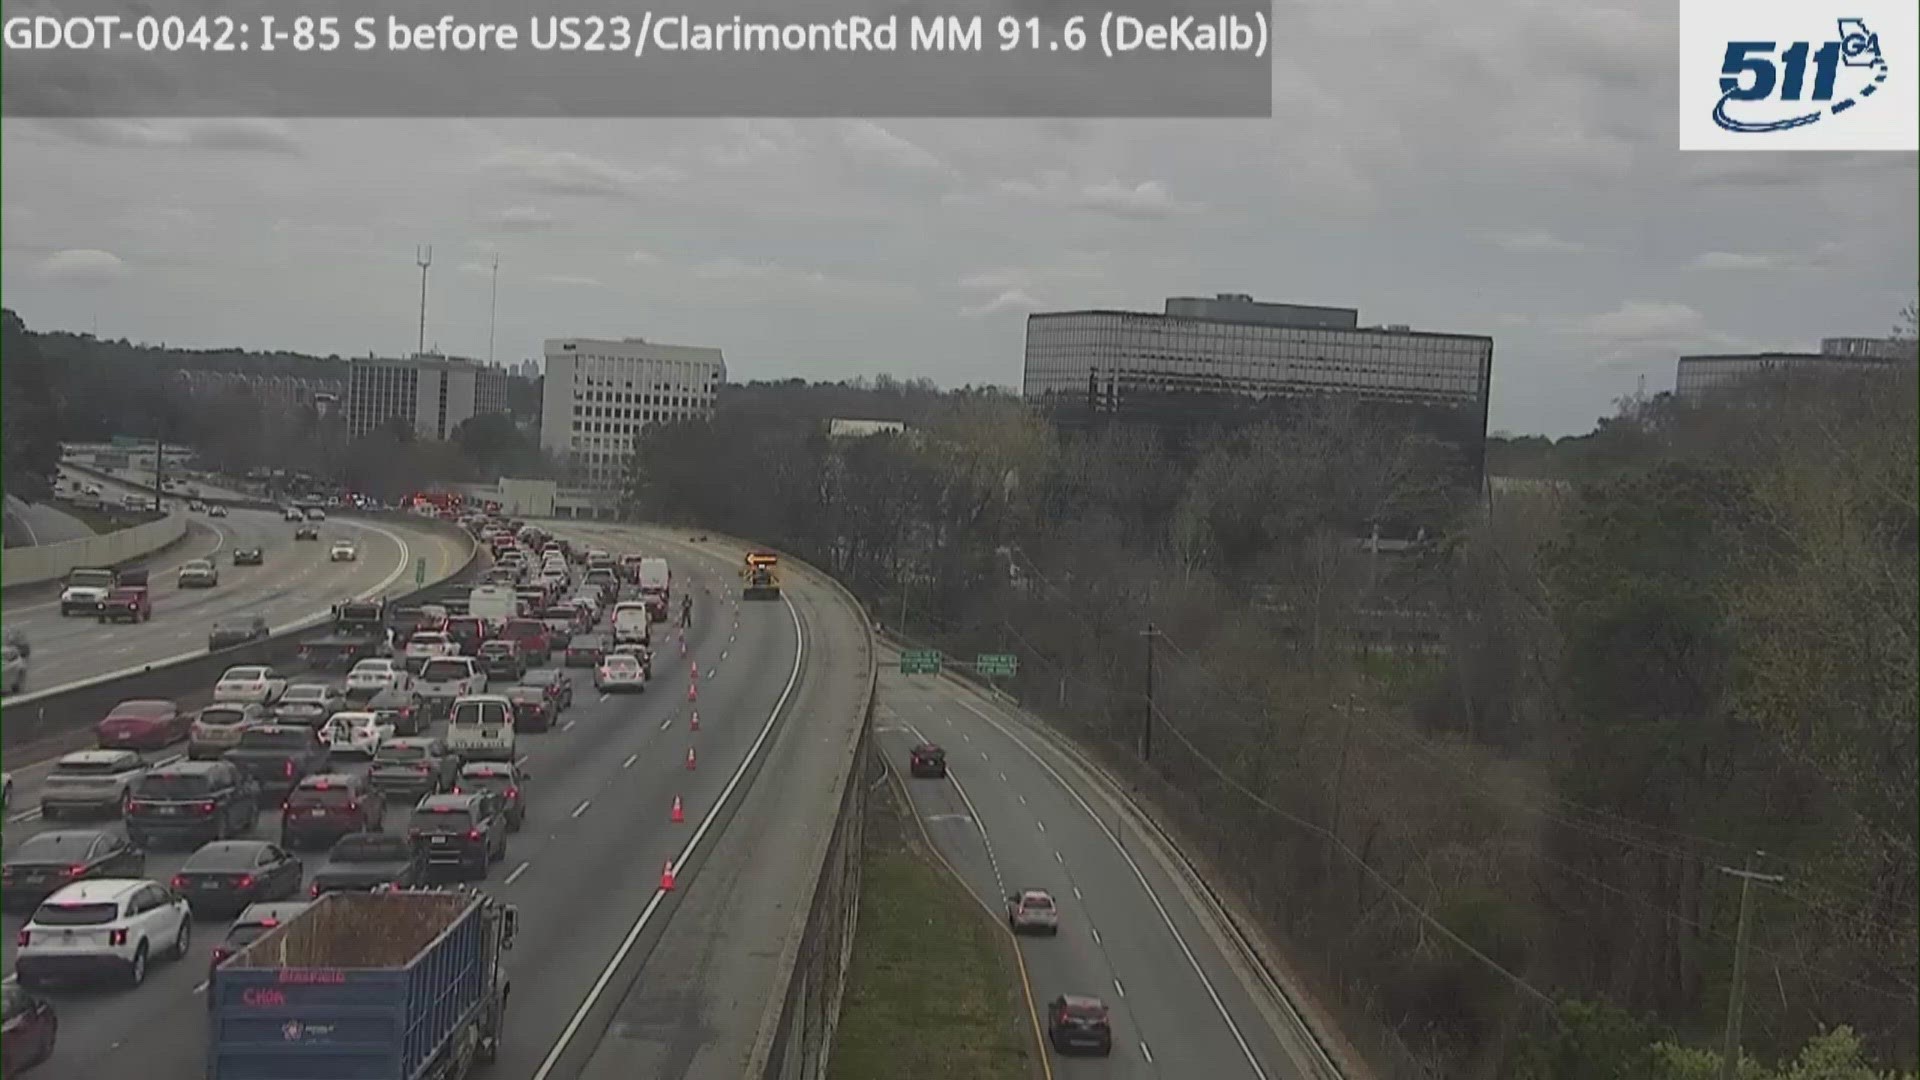 According to information from the Georgia Department of Transportation, four right lanes remain blocked on I-85 South, just before the Clairmont Road exit -- exit 91